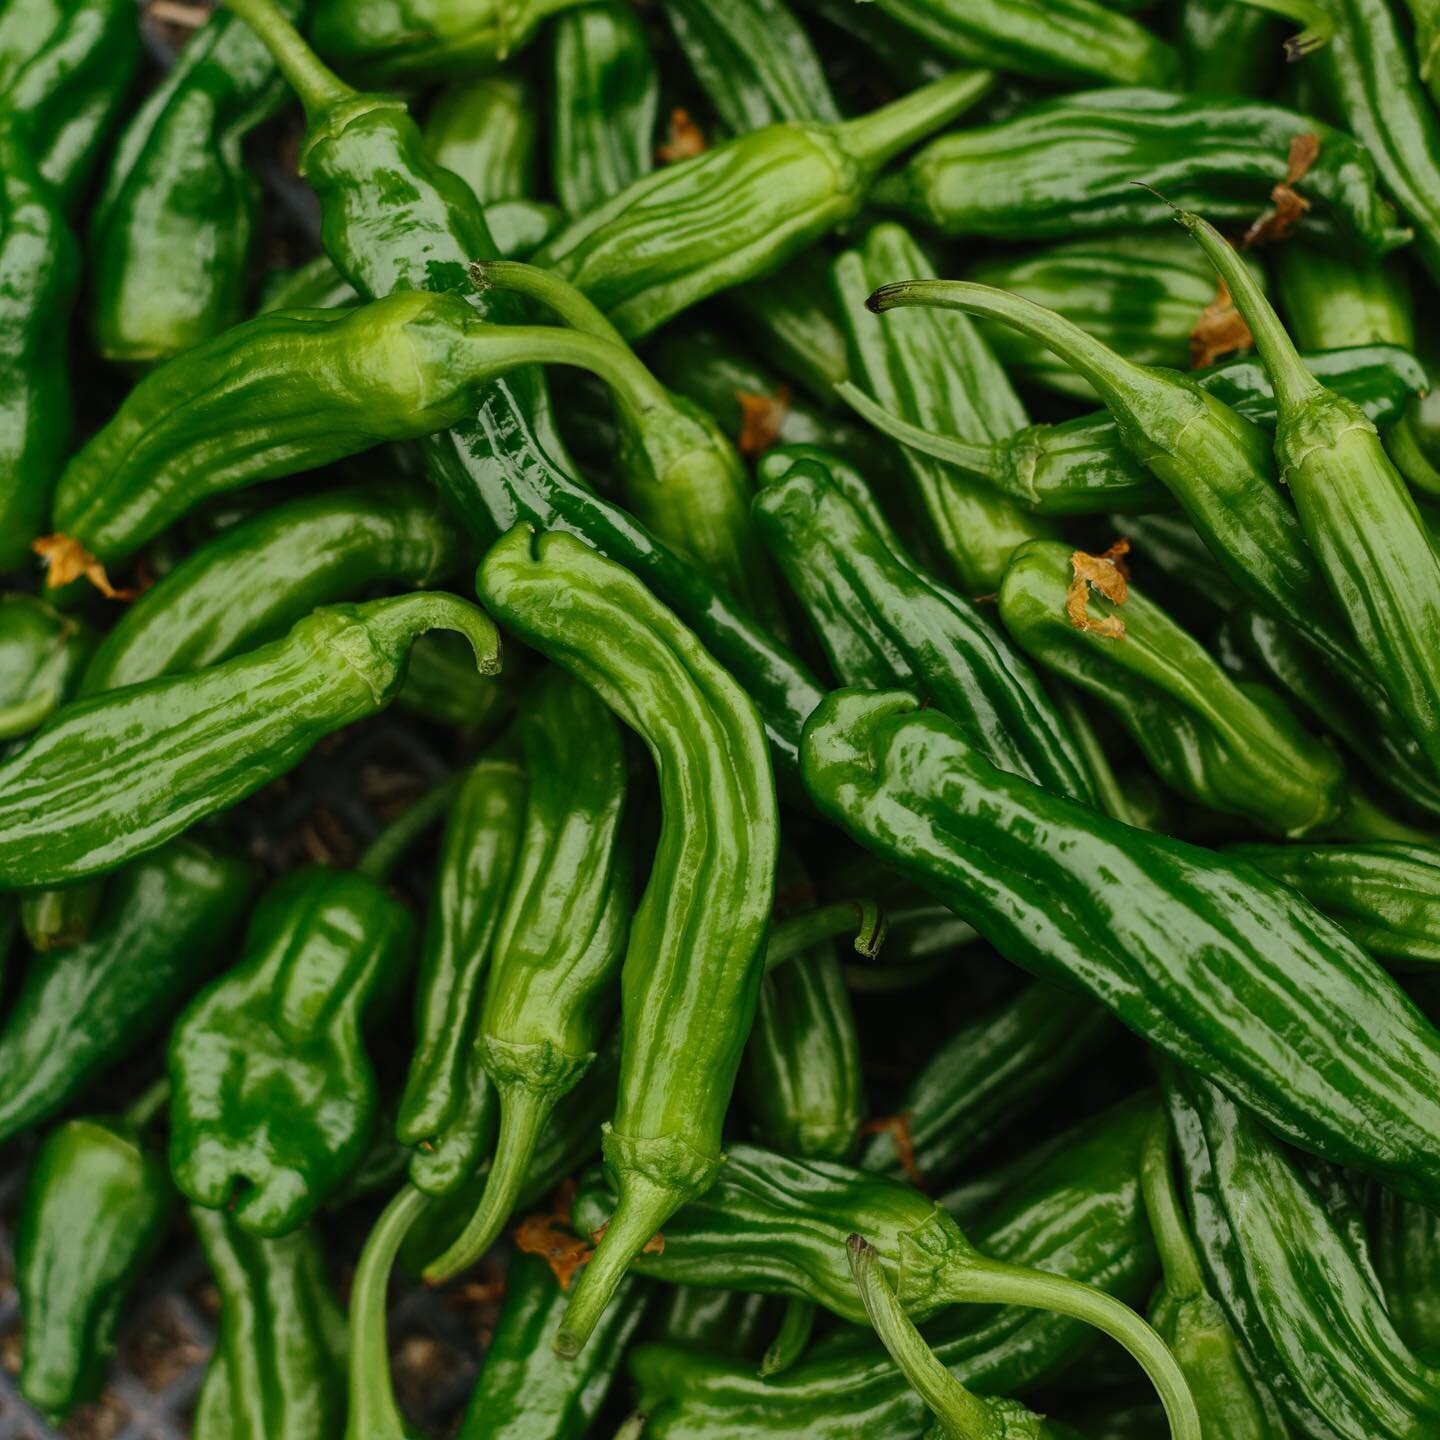 Shishito Peppers - delicate and mild, and oh so delicious when served blistered!

Photo: @patrickrecord
#shishitopeppers
#organic
#farmtotable
#lifeonthefarm
#organictomatoes
#italianheirloomzucchini
#heirloomtomatoes 
#meyerlemons
#mandarinoranges
#